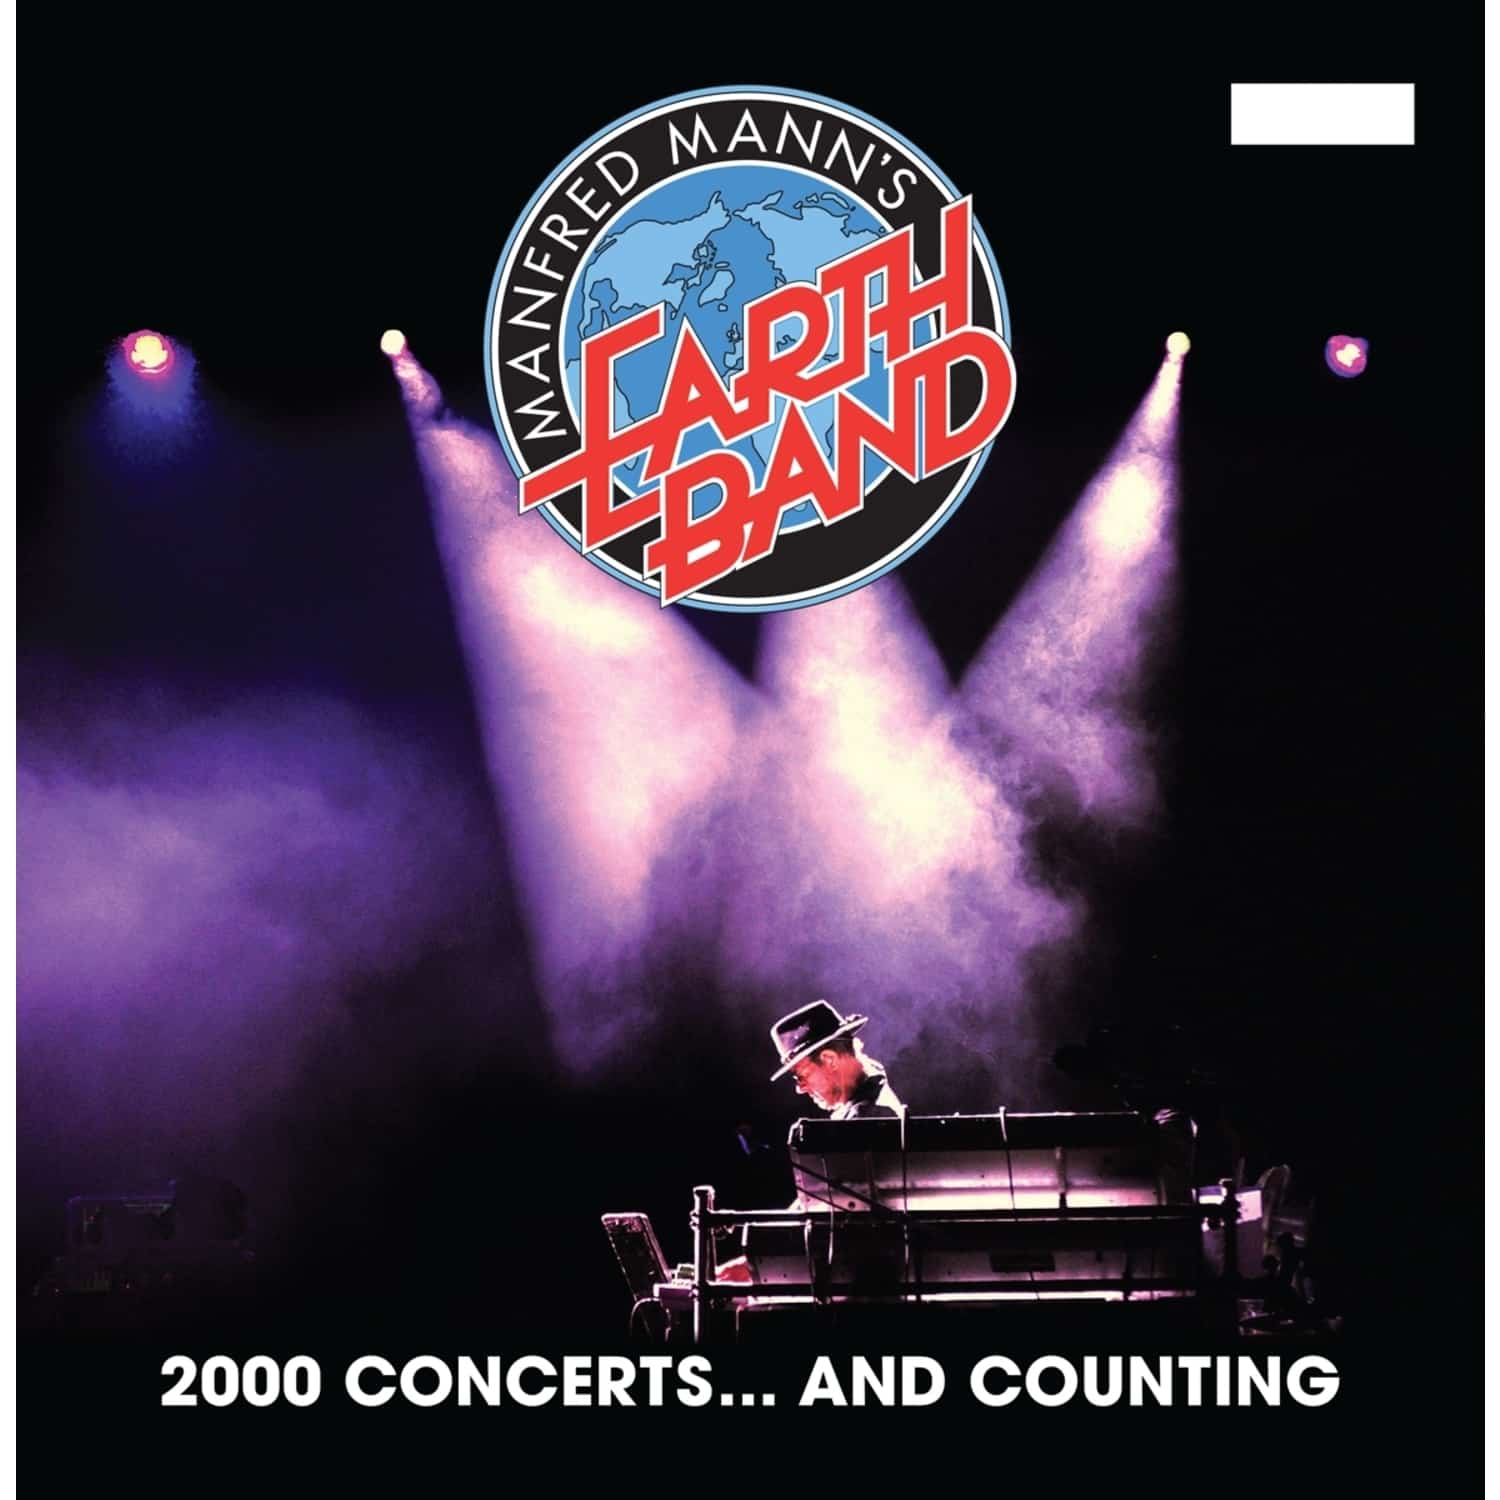 Manfred Mann s Earth Band - 2000 CONCERTS...AND COUNTING 